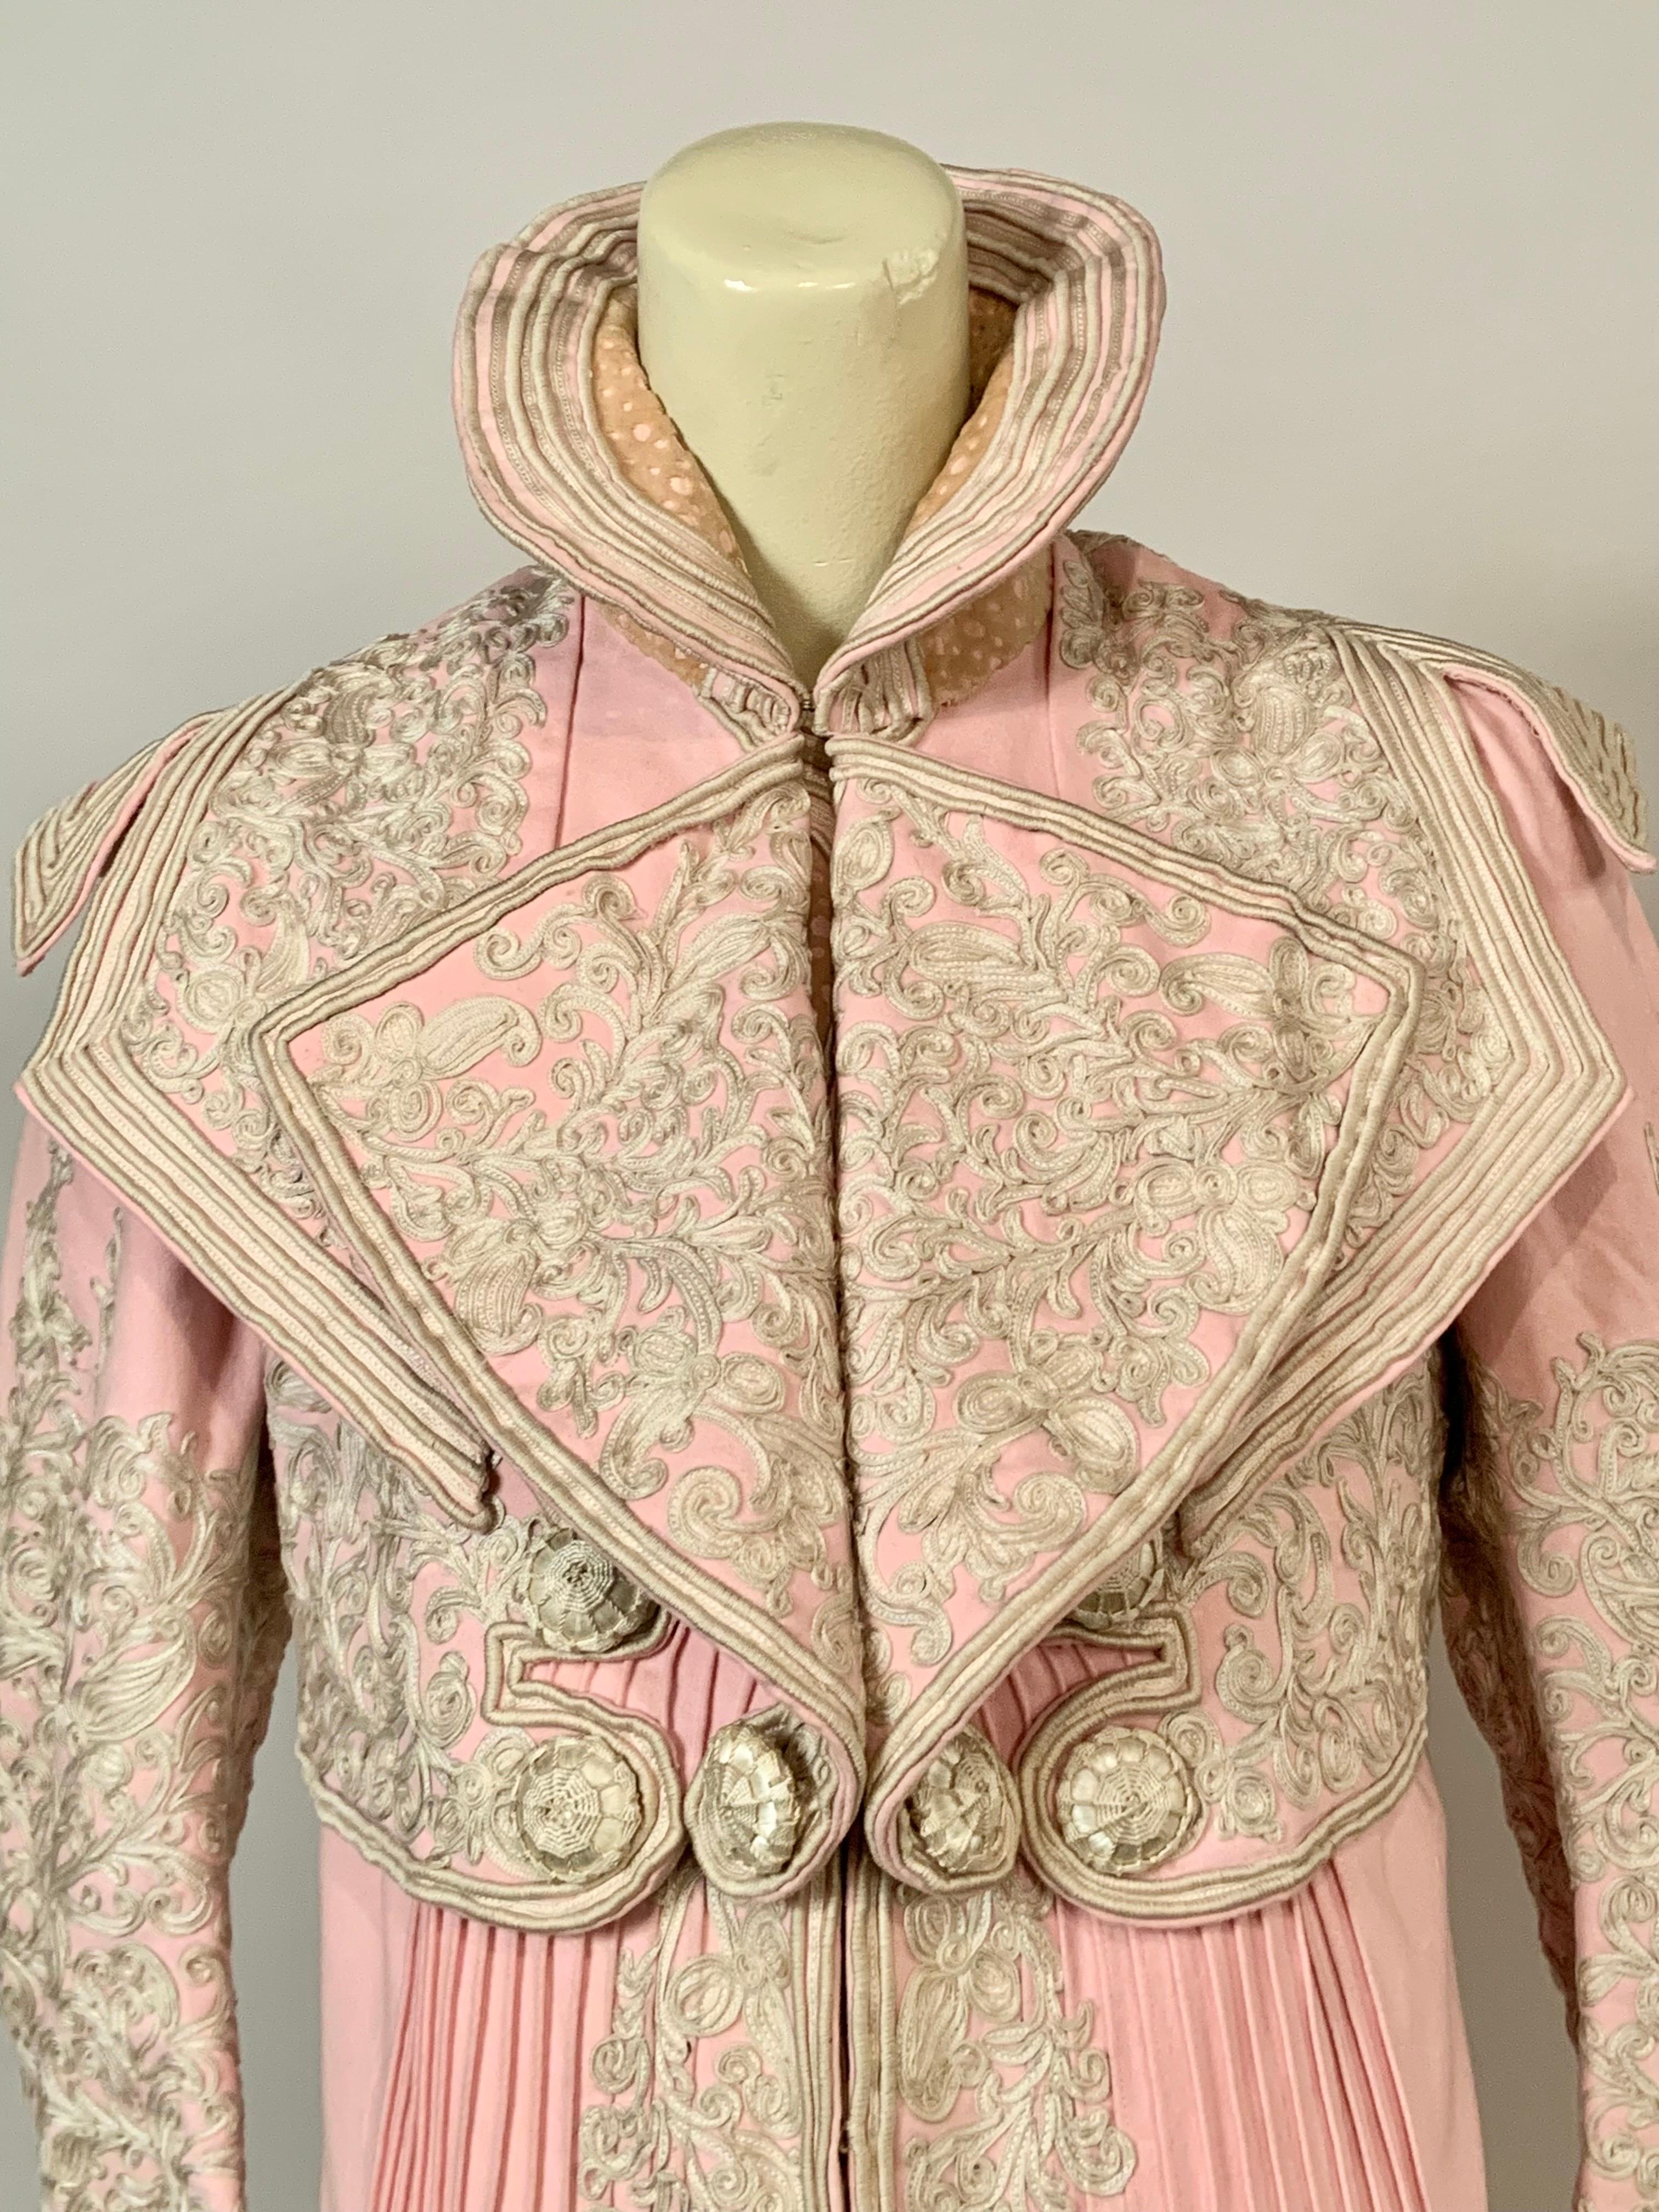 \\One of the prettiest coats I have ever owned, this bright pink wool coat is embellished with scrolling ribbon work decoration on the collar, bodice, sleeves, cuffs, the front of the coat, the hemline and the back of the coat. In addition, there